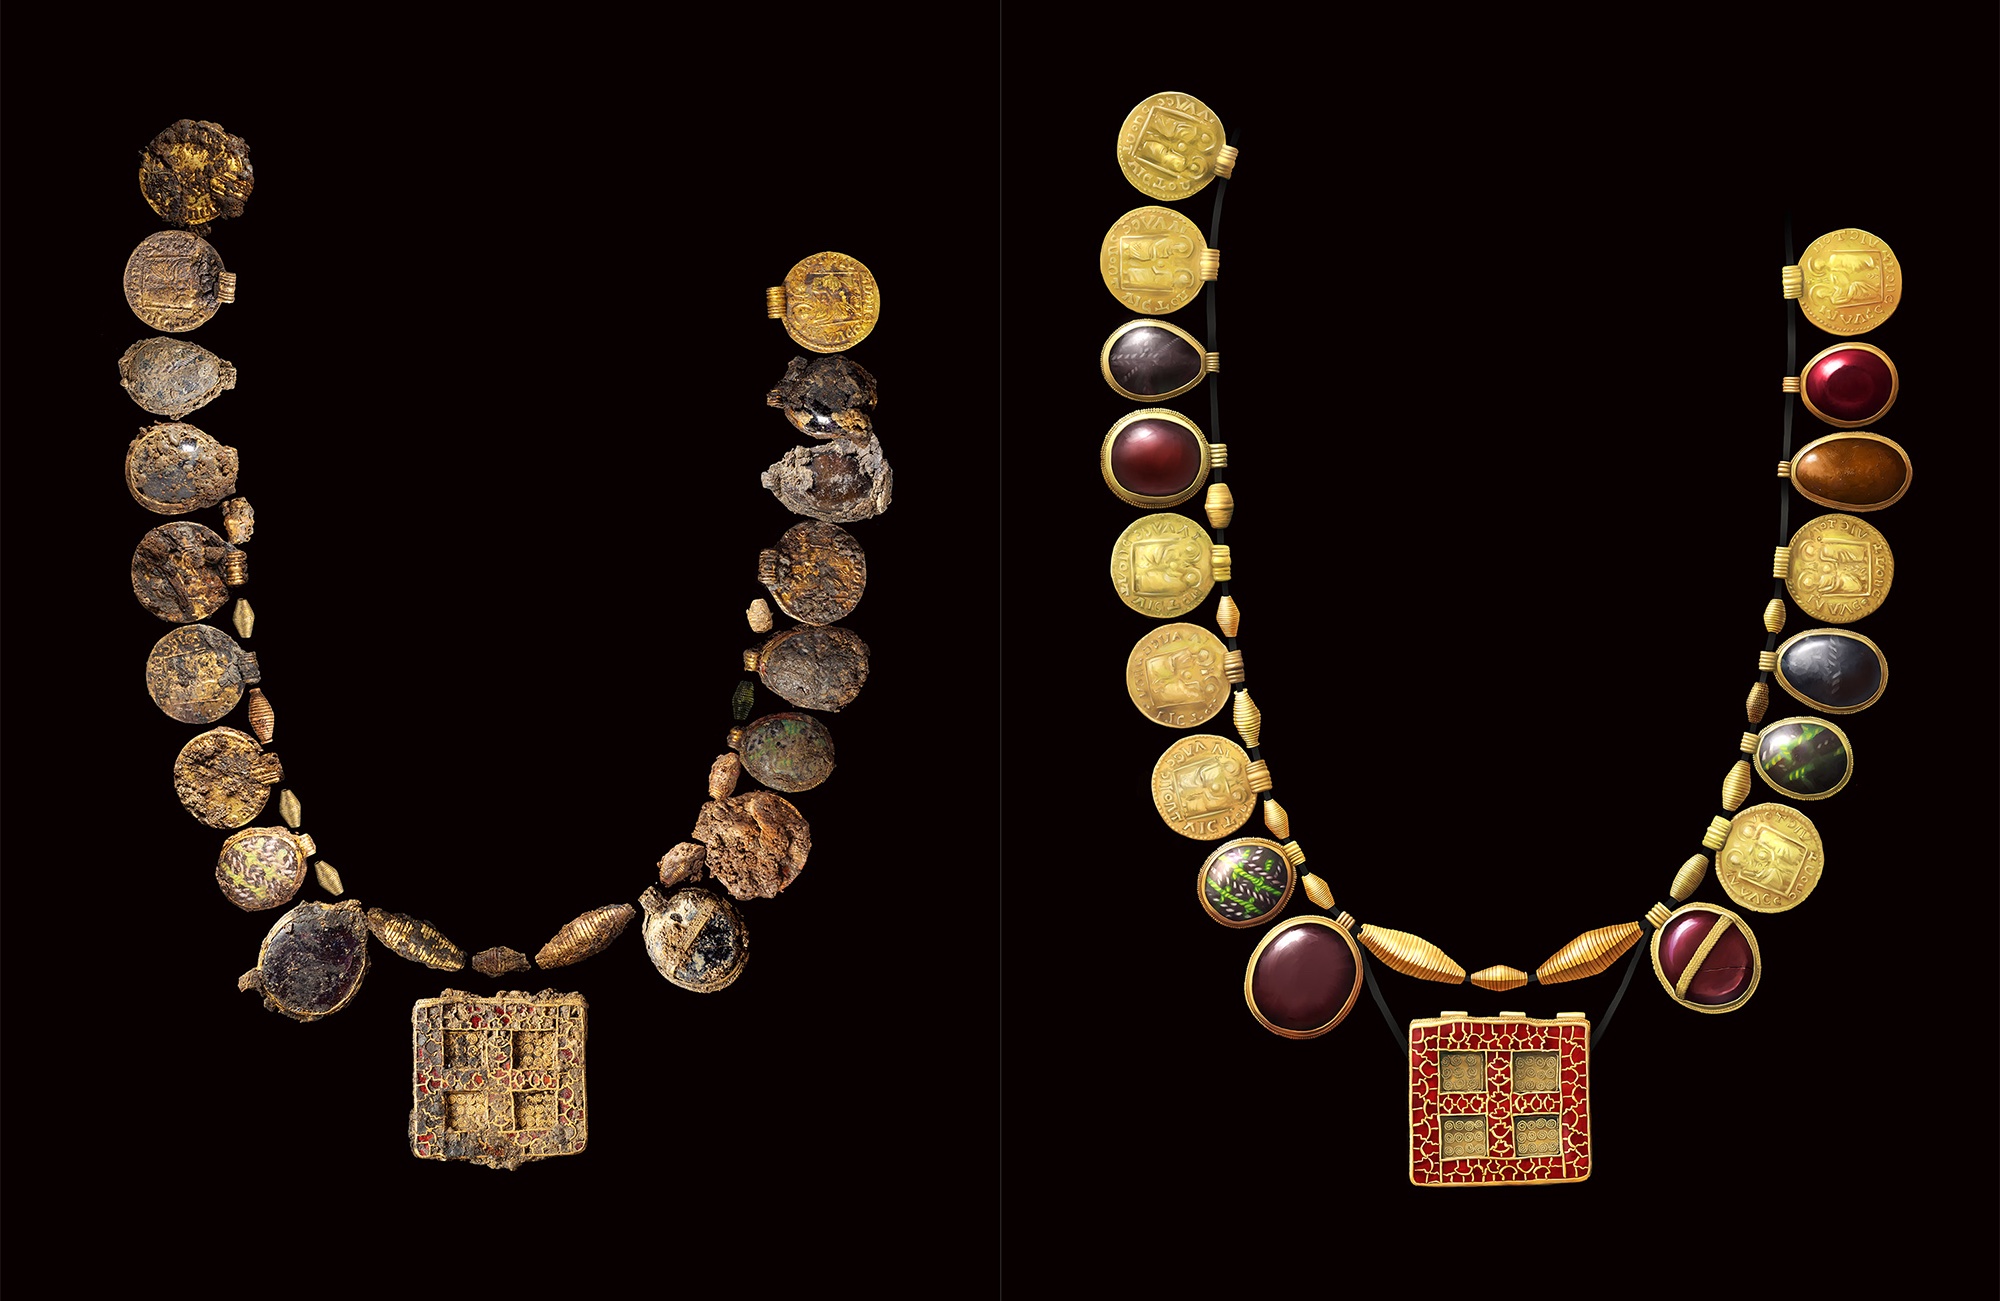 Necklace reconstruction and layout side by side mola 1